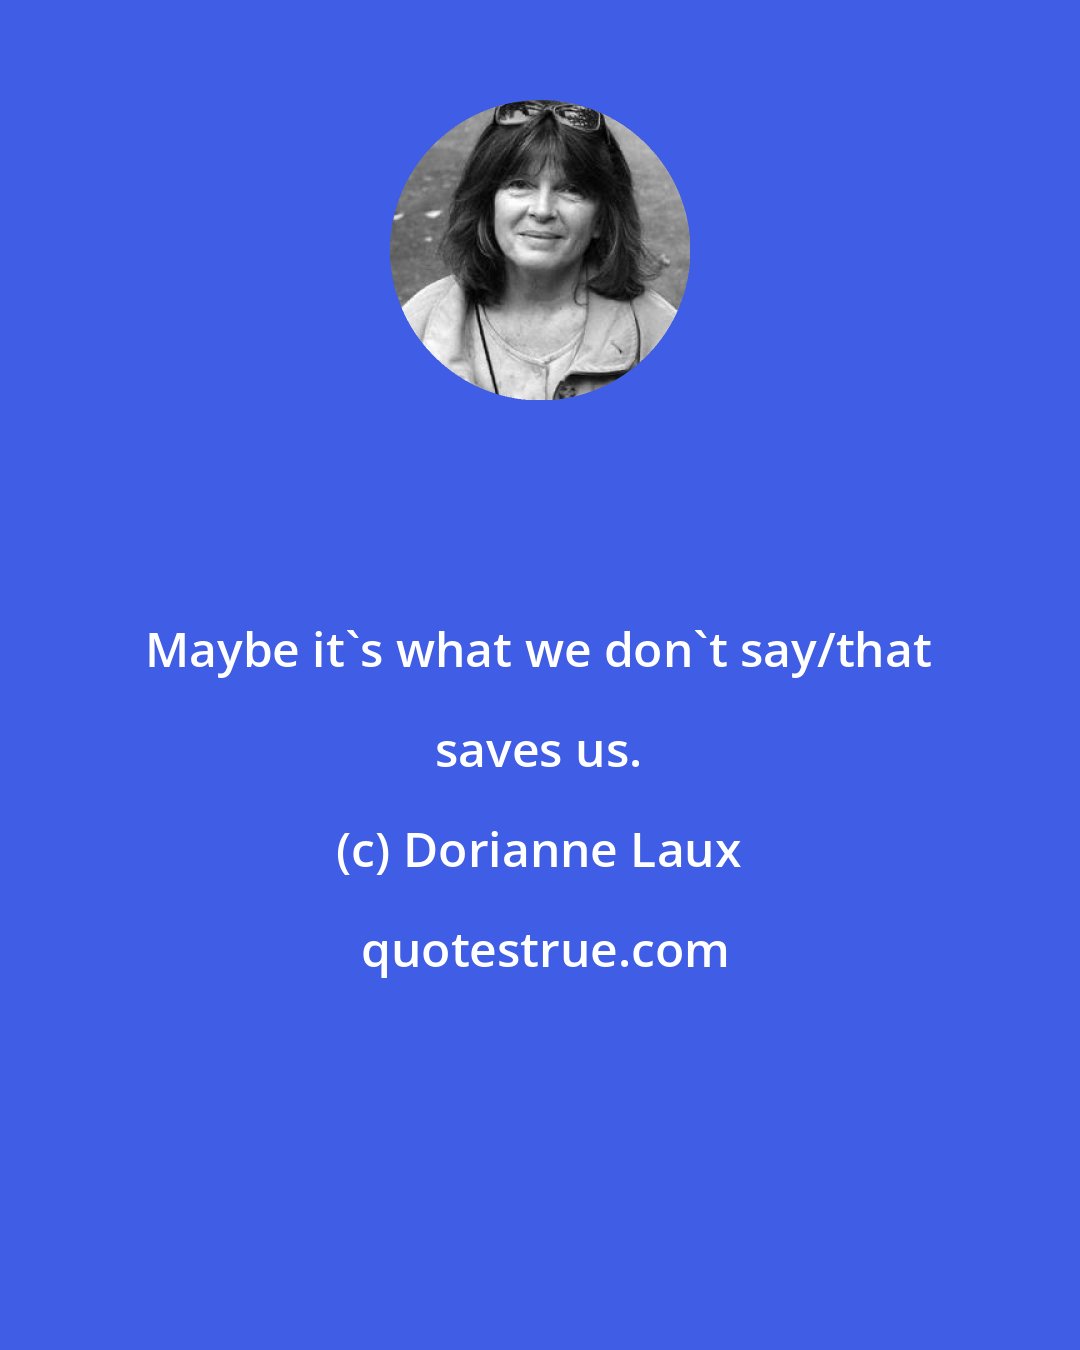 Dorianne Laux: Maybe it's what we don't say/that saves us.